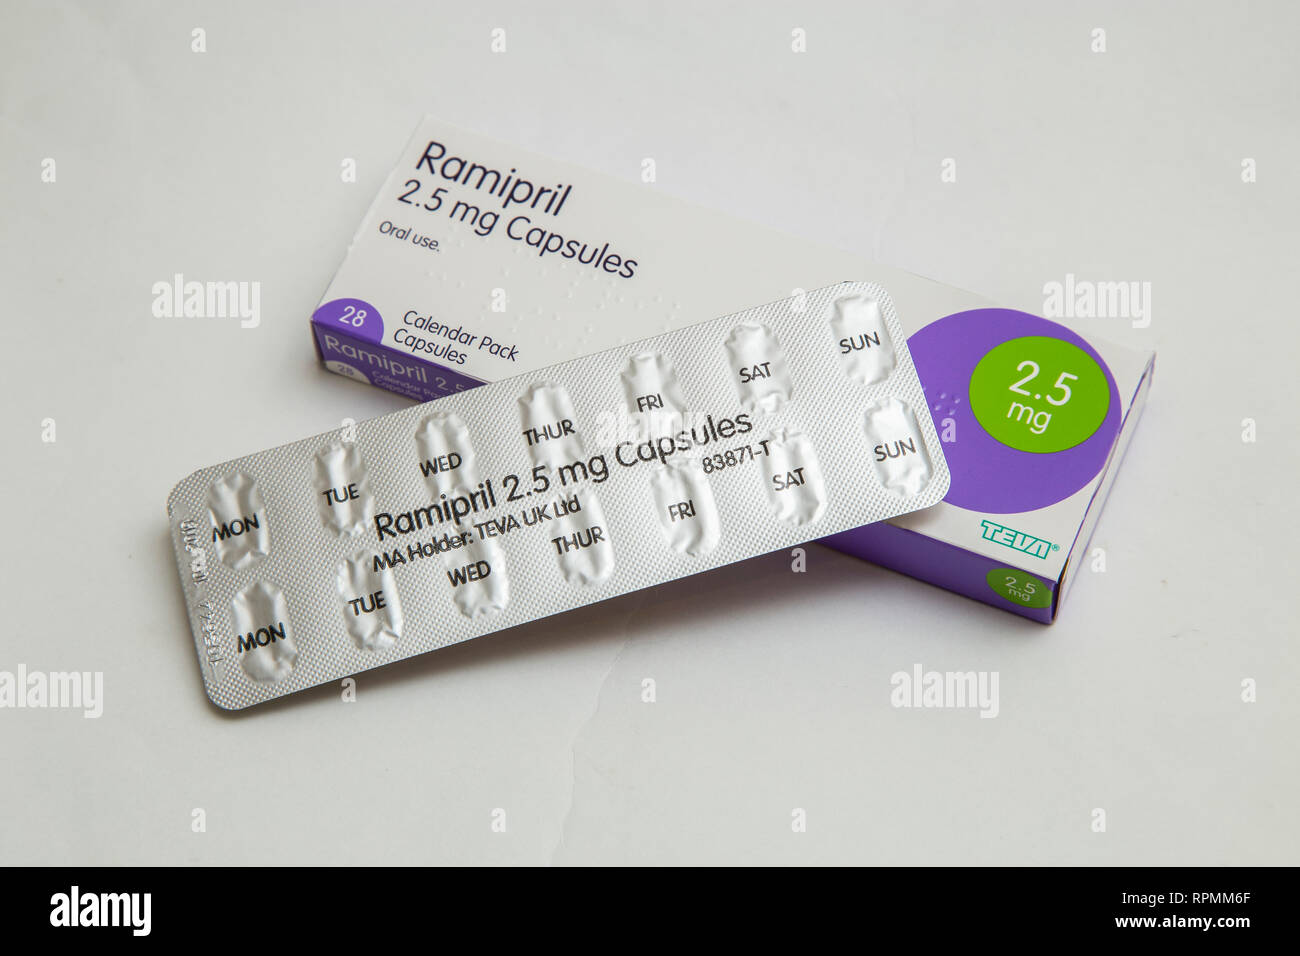 Ramipril, an angiotensin-converting enzyme inhibitor drug which treats high blood pressure typically taken after a heart attack failure. Stock Photo